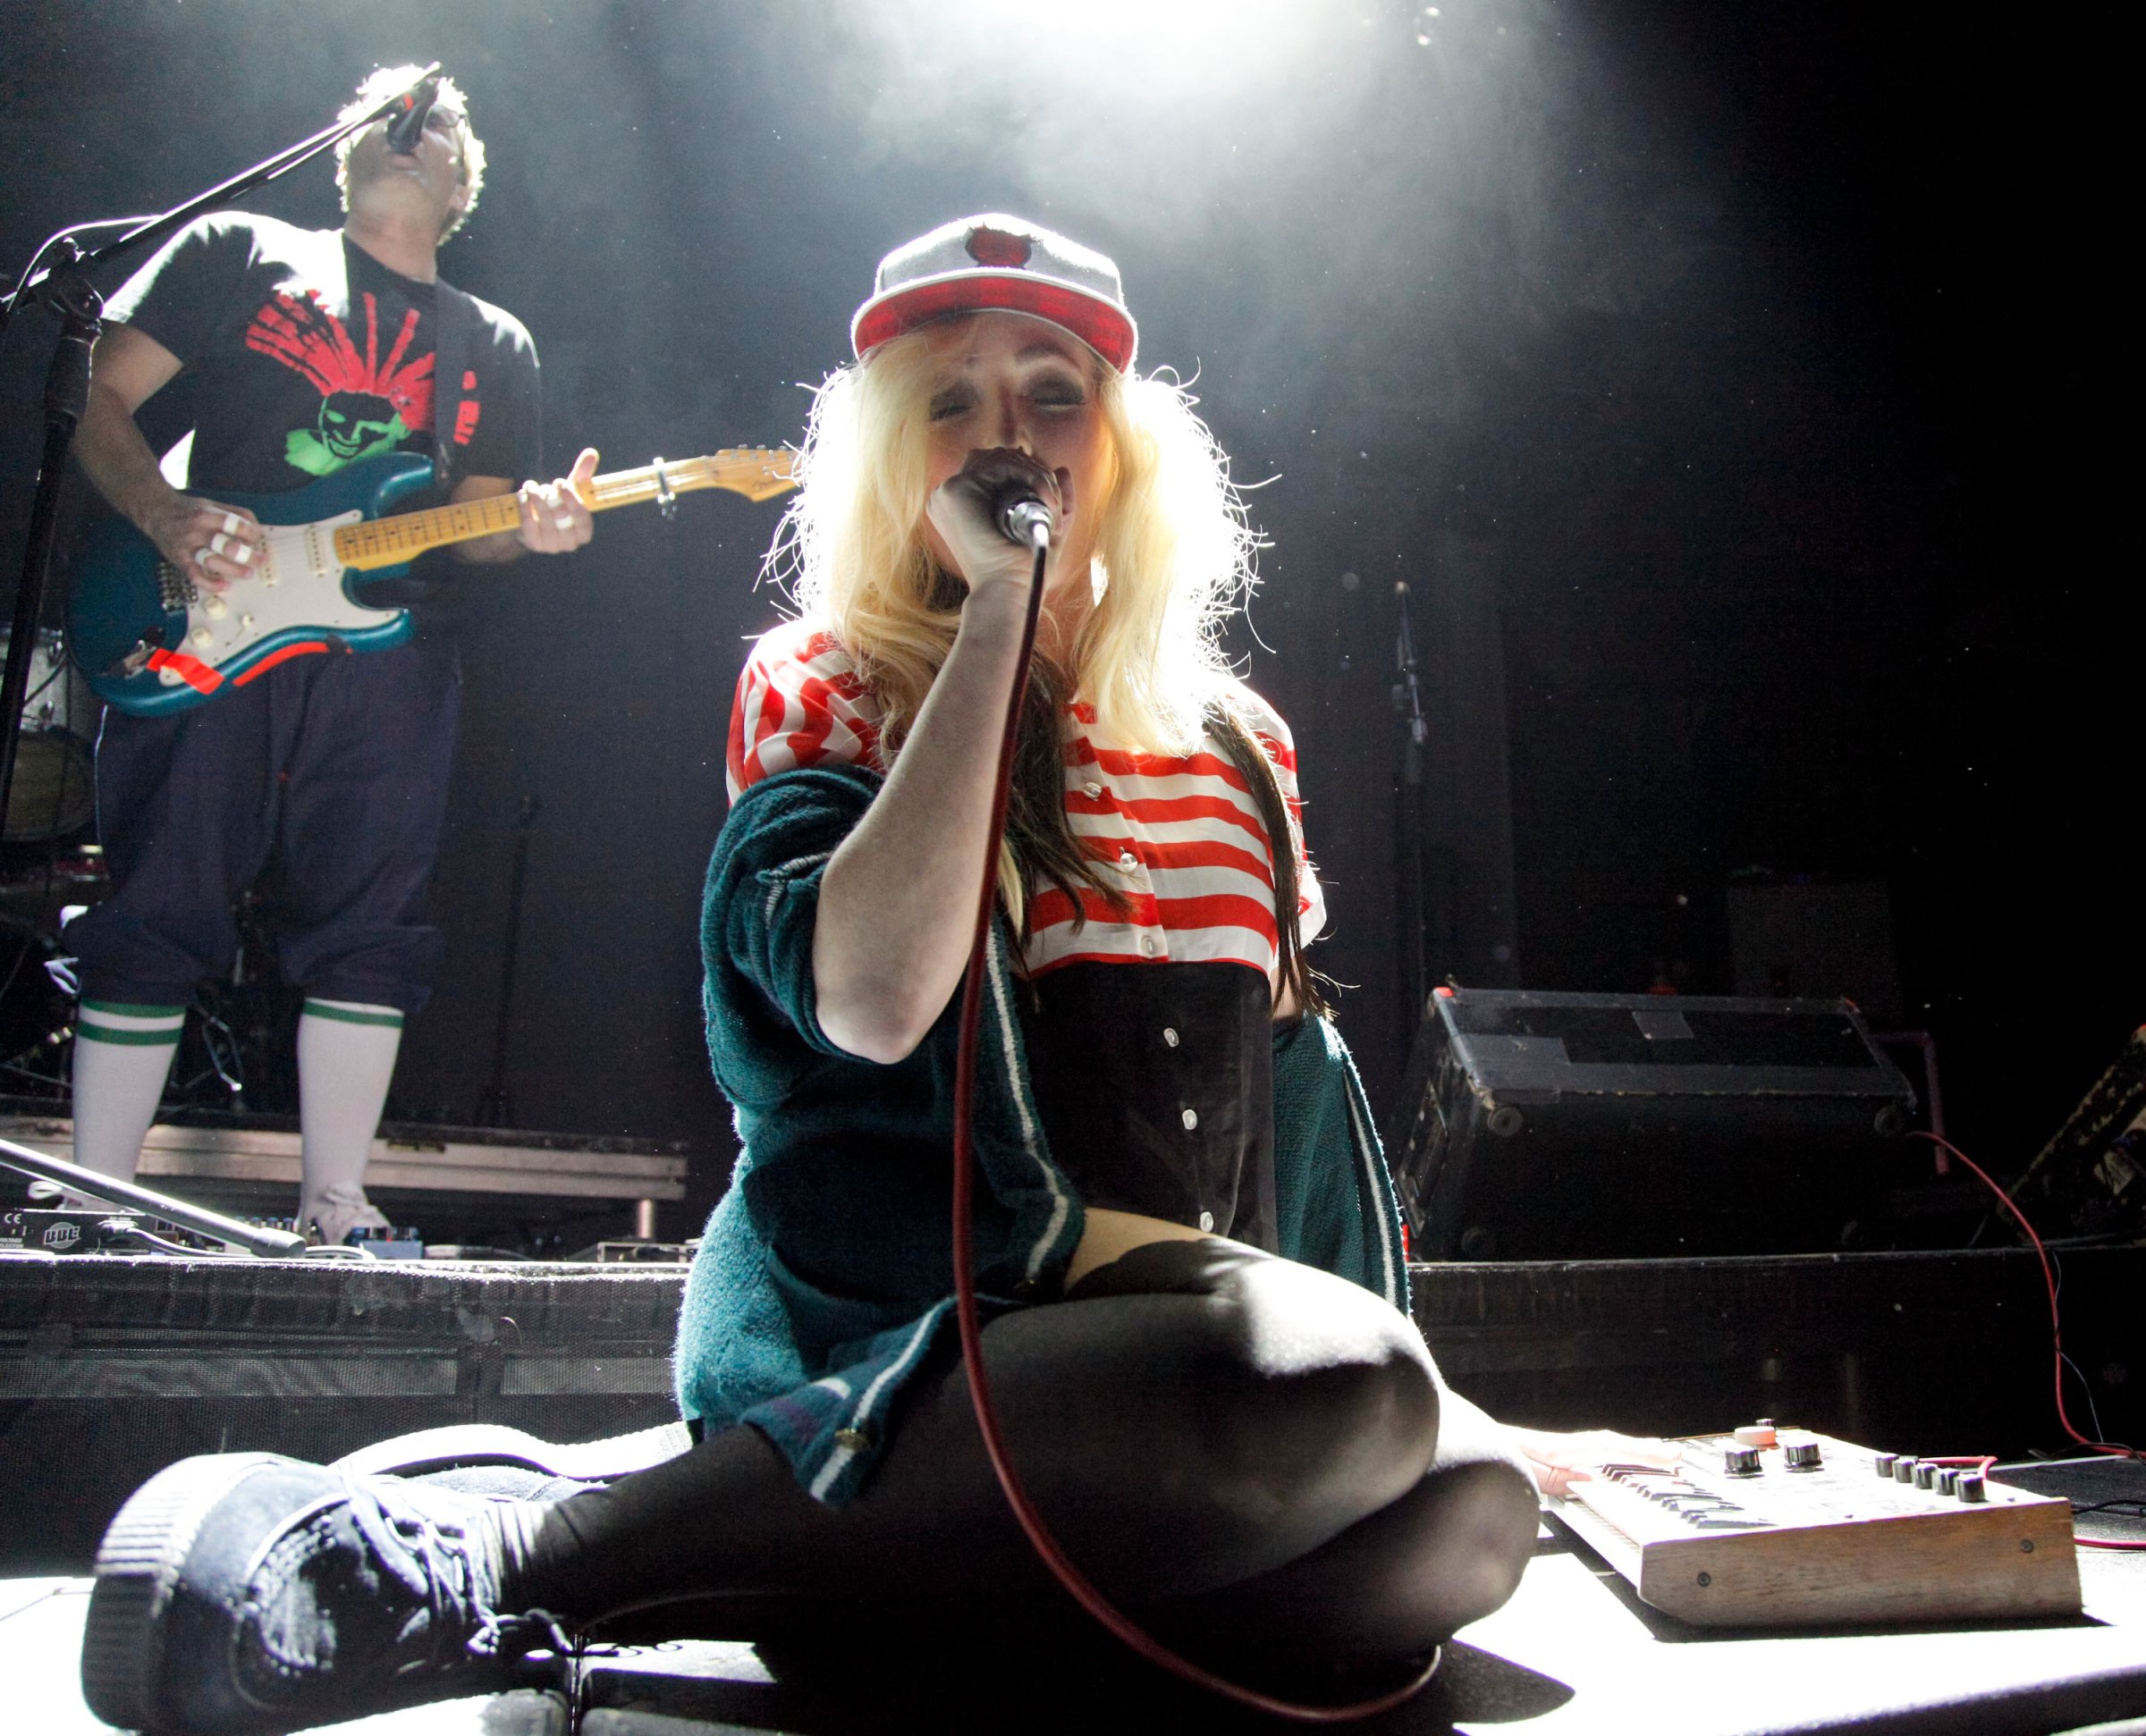 Jules de Martino (L) and Katie White of The Ting Tings perform onstage at The Mayan on March 22, 2012 in Los Angeles.